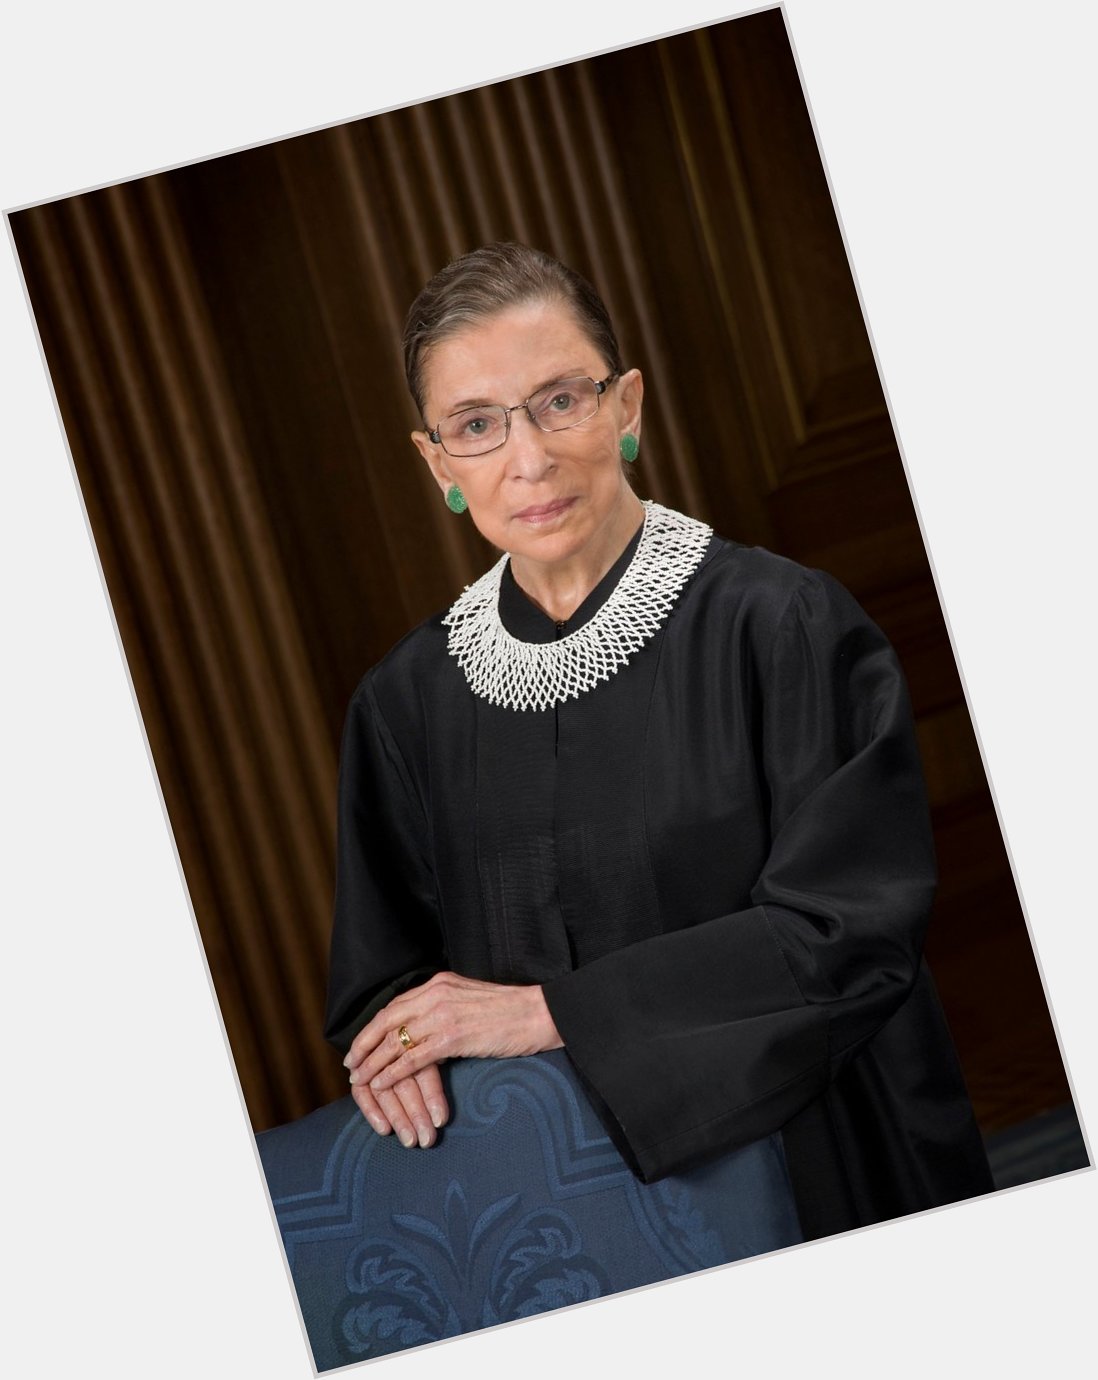 Happy birthday to Ruth Bader Ginsburg--a fighter and role model. May she have many more. 